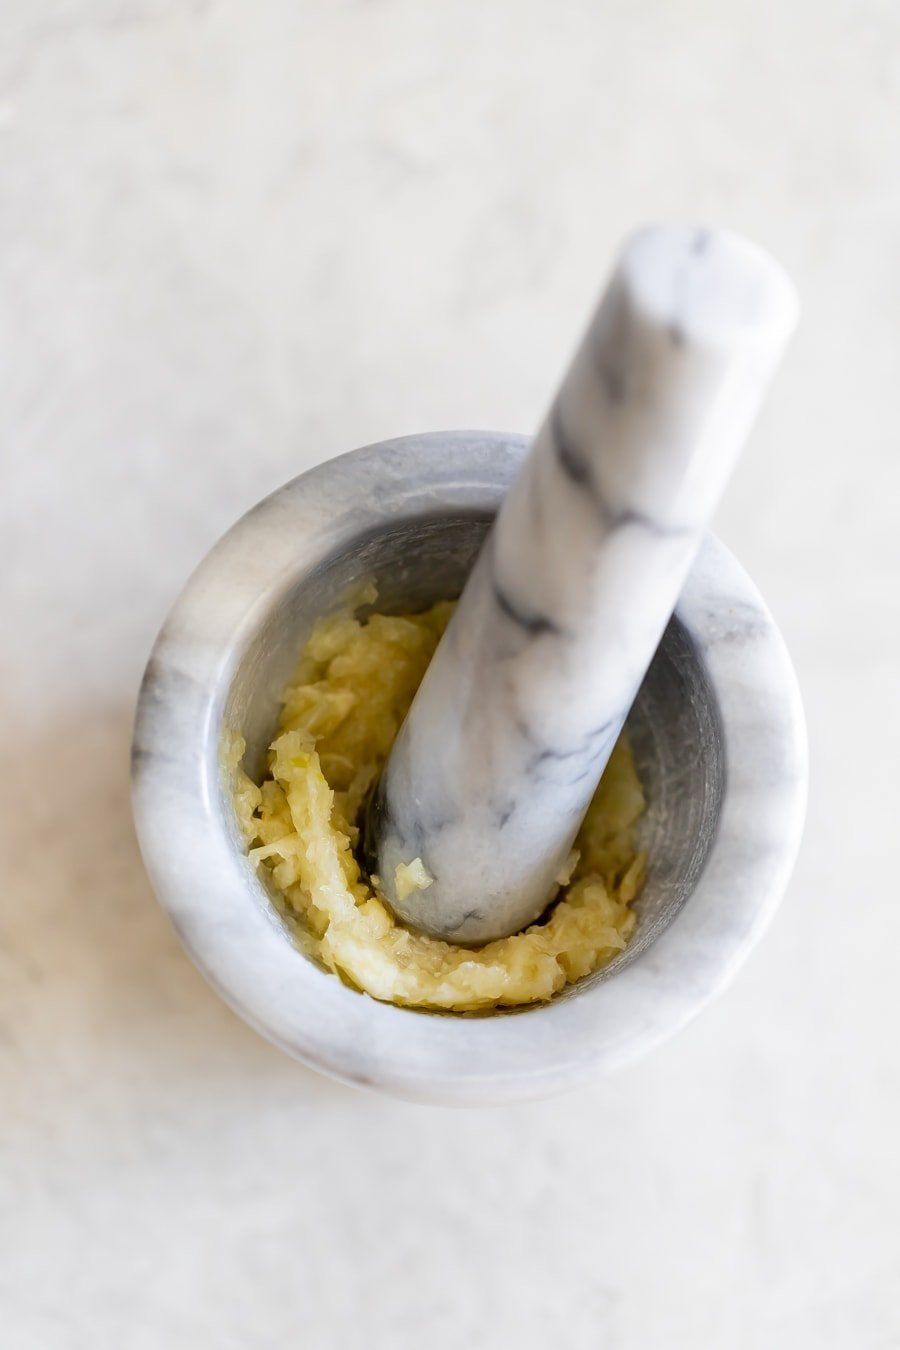 mashed garlic in mortar and pestle